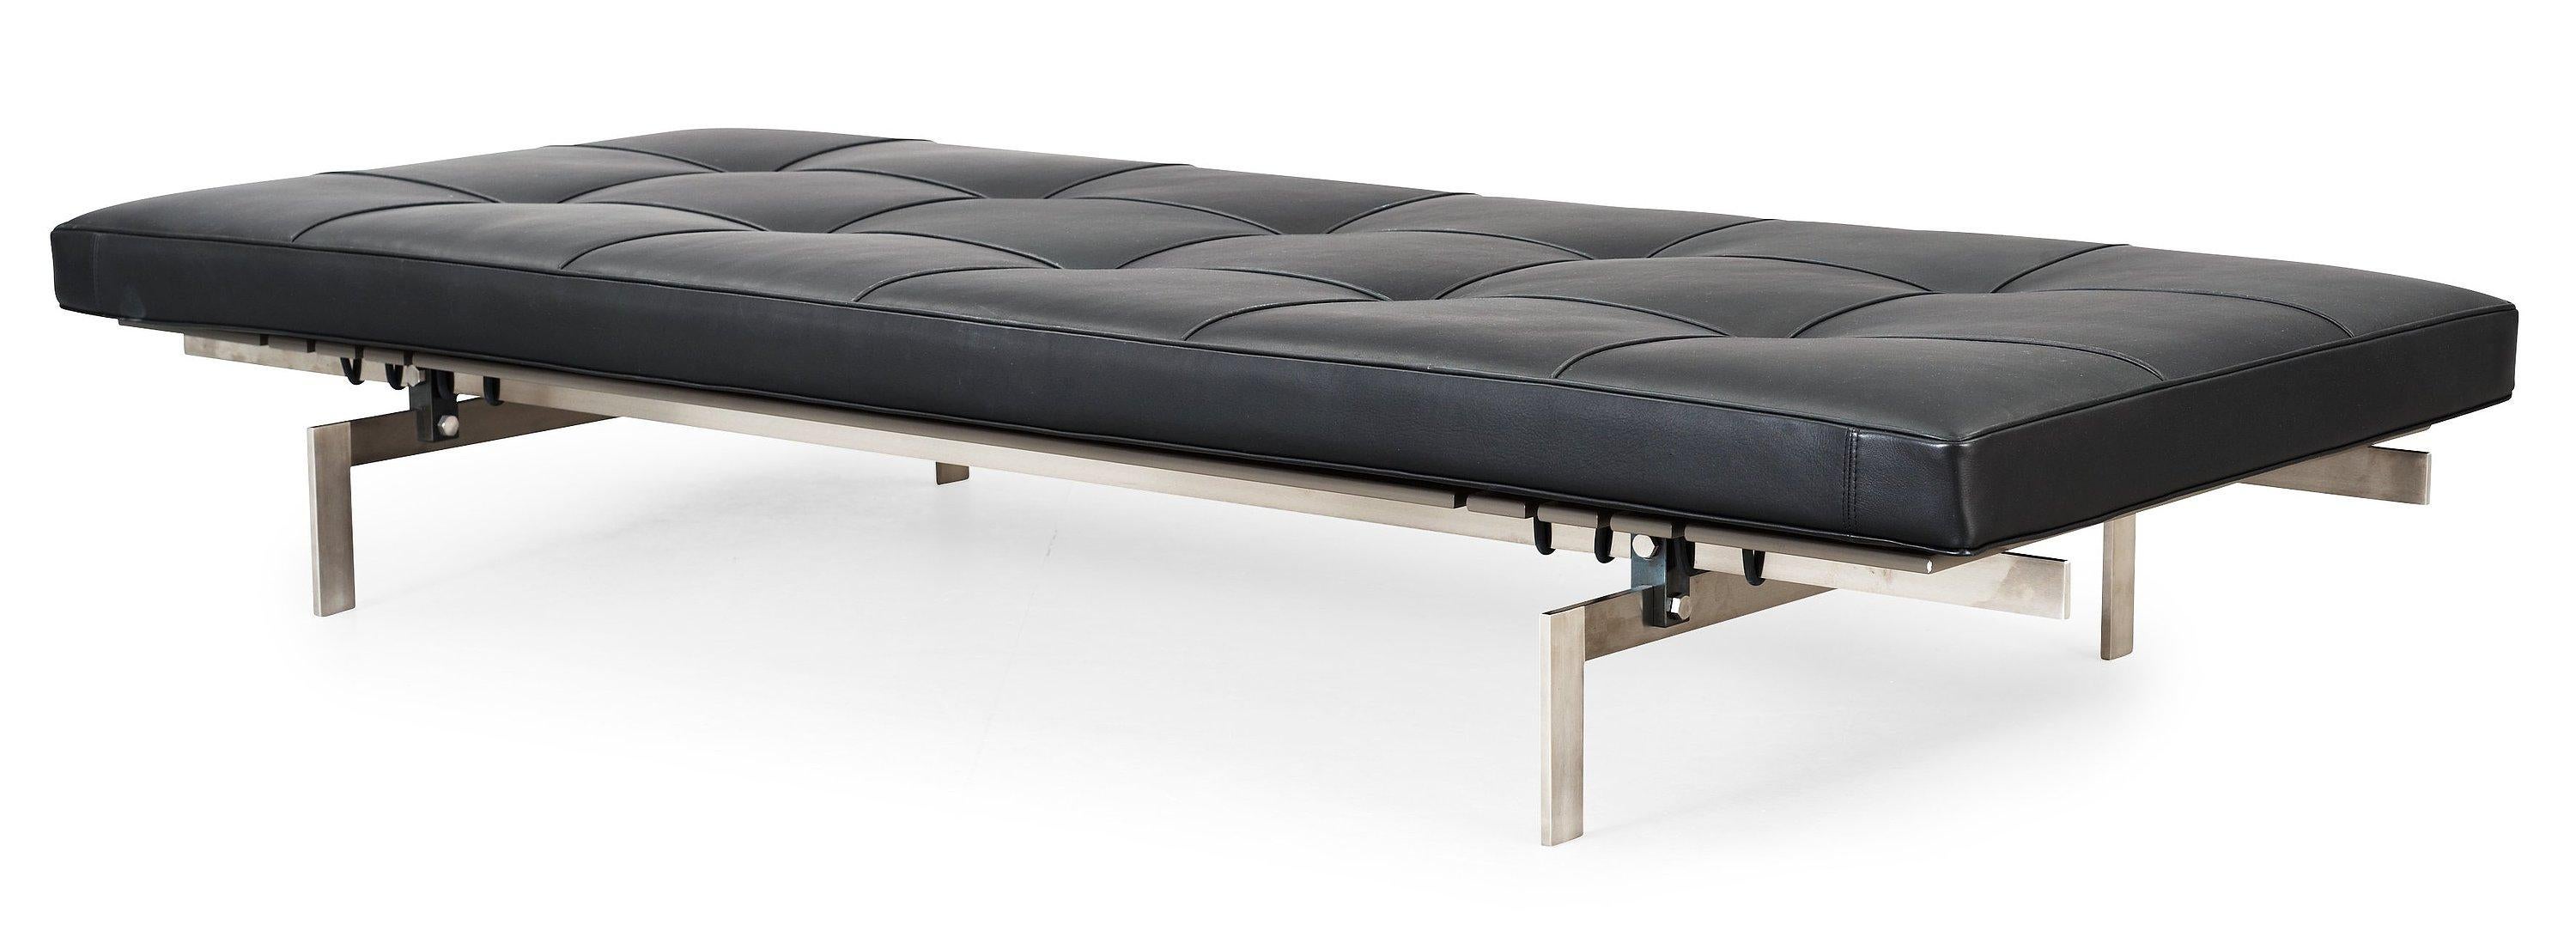 Poul Kjaerholm Black Leather & Steel PK80 Daybed by Fritz Hansen, Danish Minimal In Good Condition In Brooklyn, NY